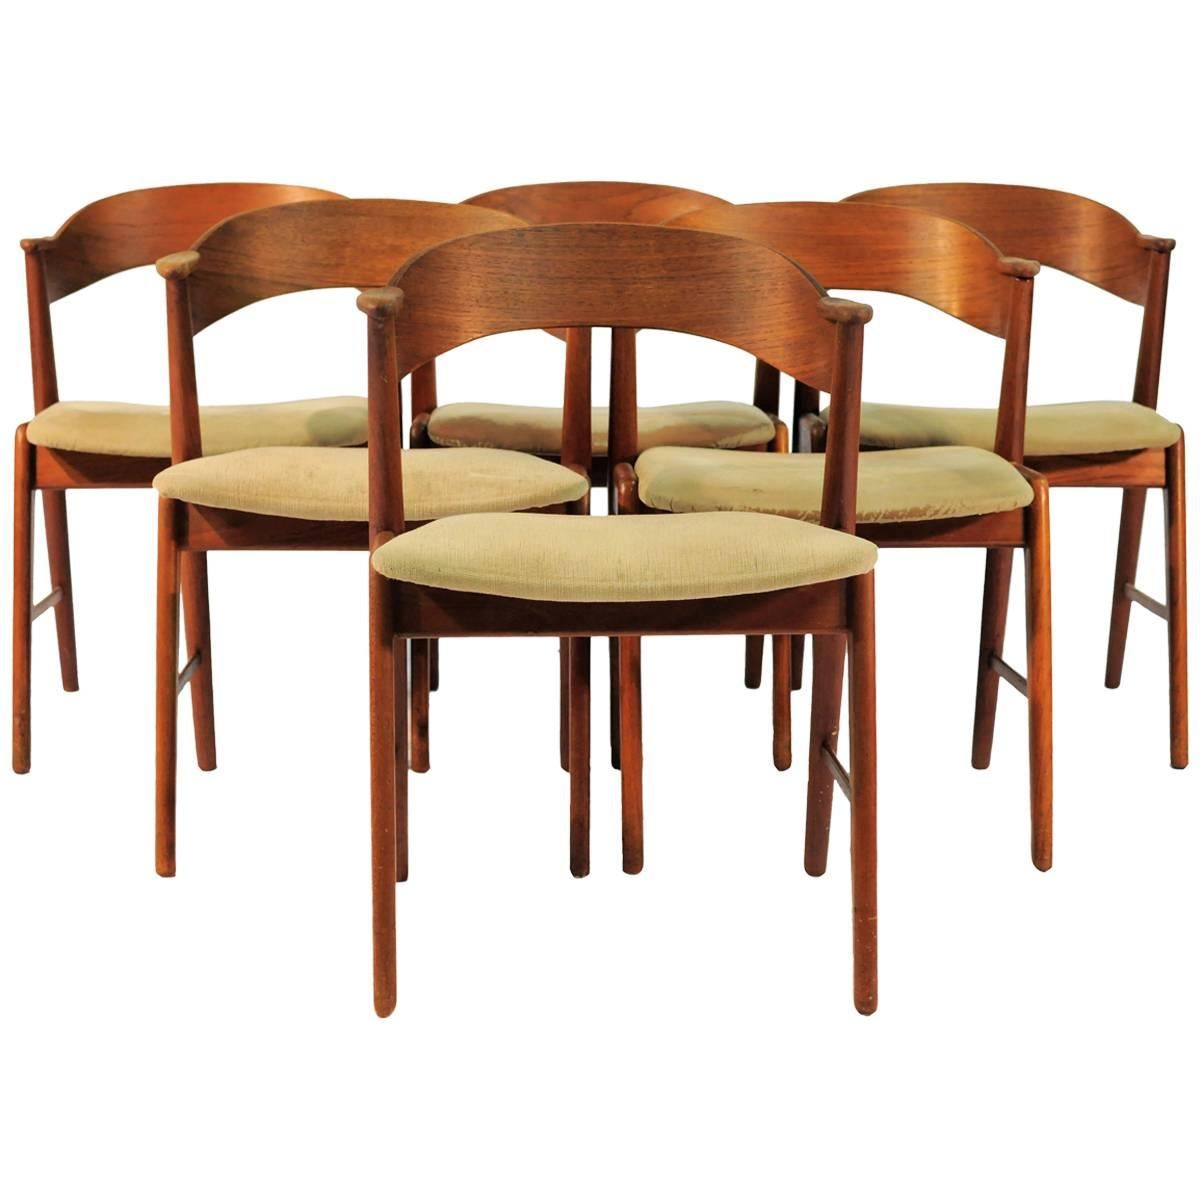 1960s Set of Six Danish Teak Dining Chairs Known as Model 32